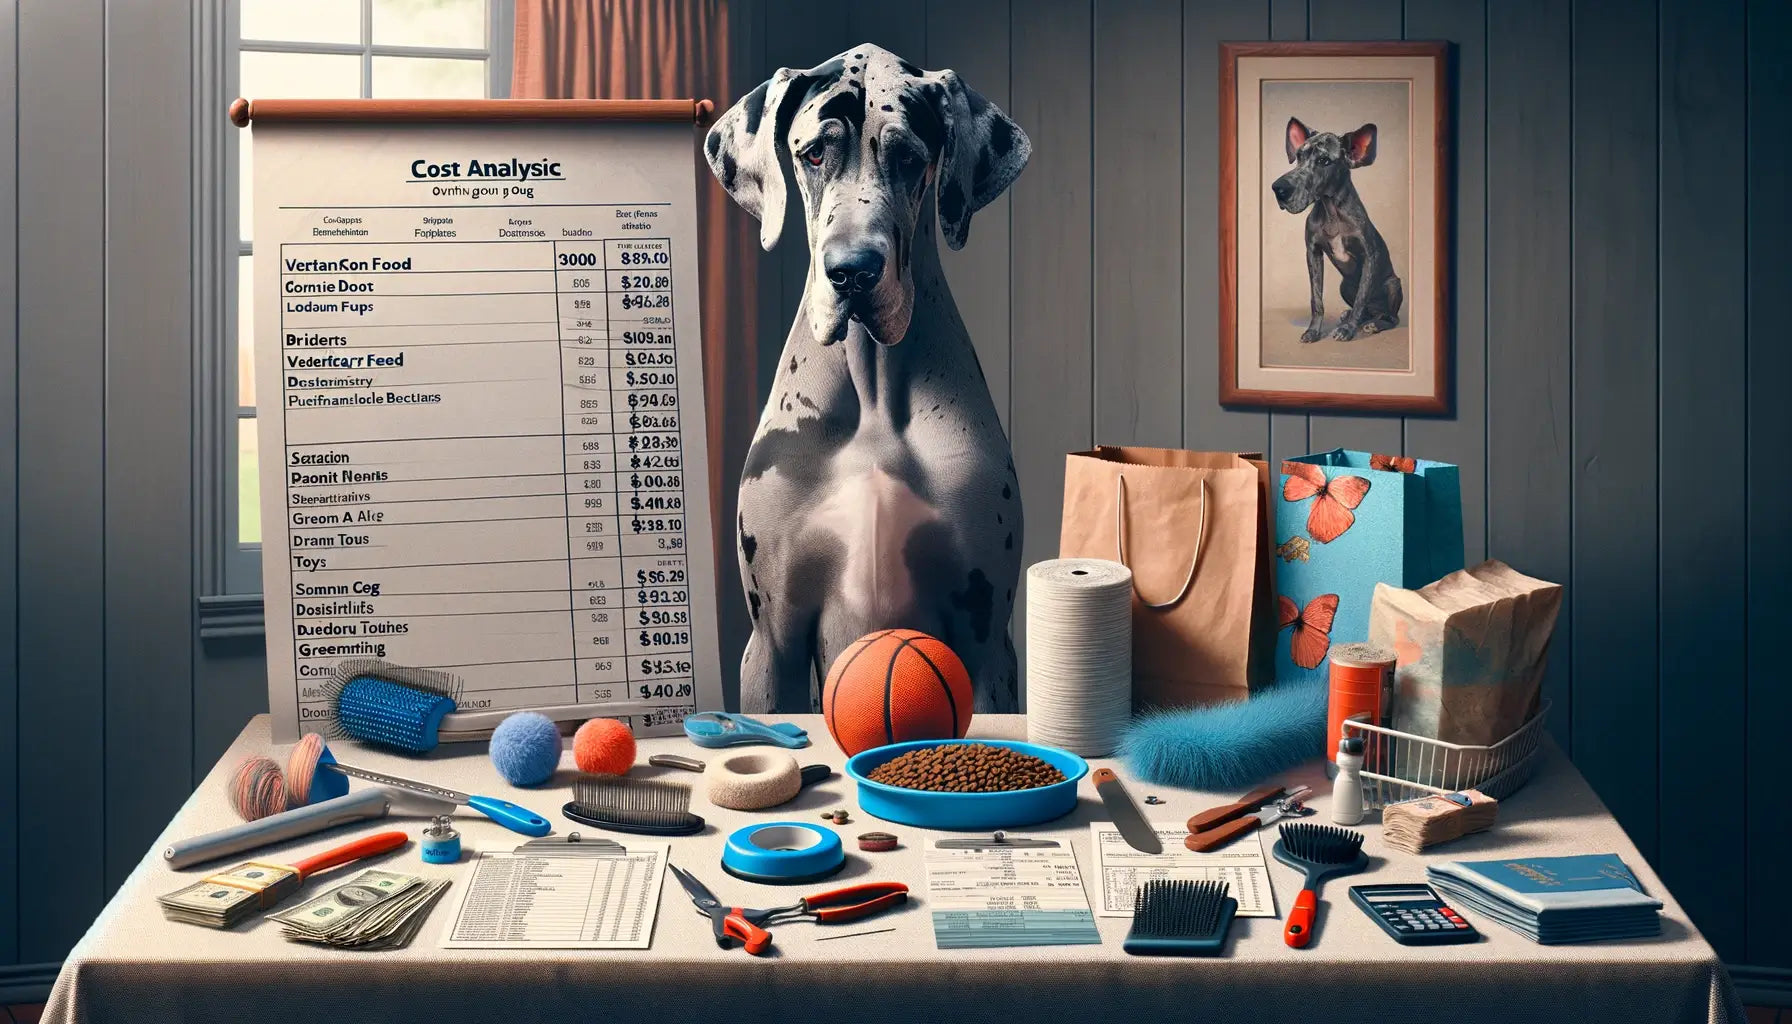 A Merle Great Dane sitting beside a table displaying dog-related expenses, symbolizing cost analysis for owning the dog.